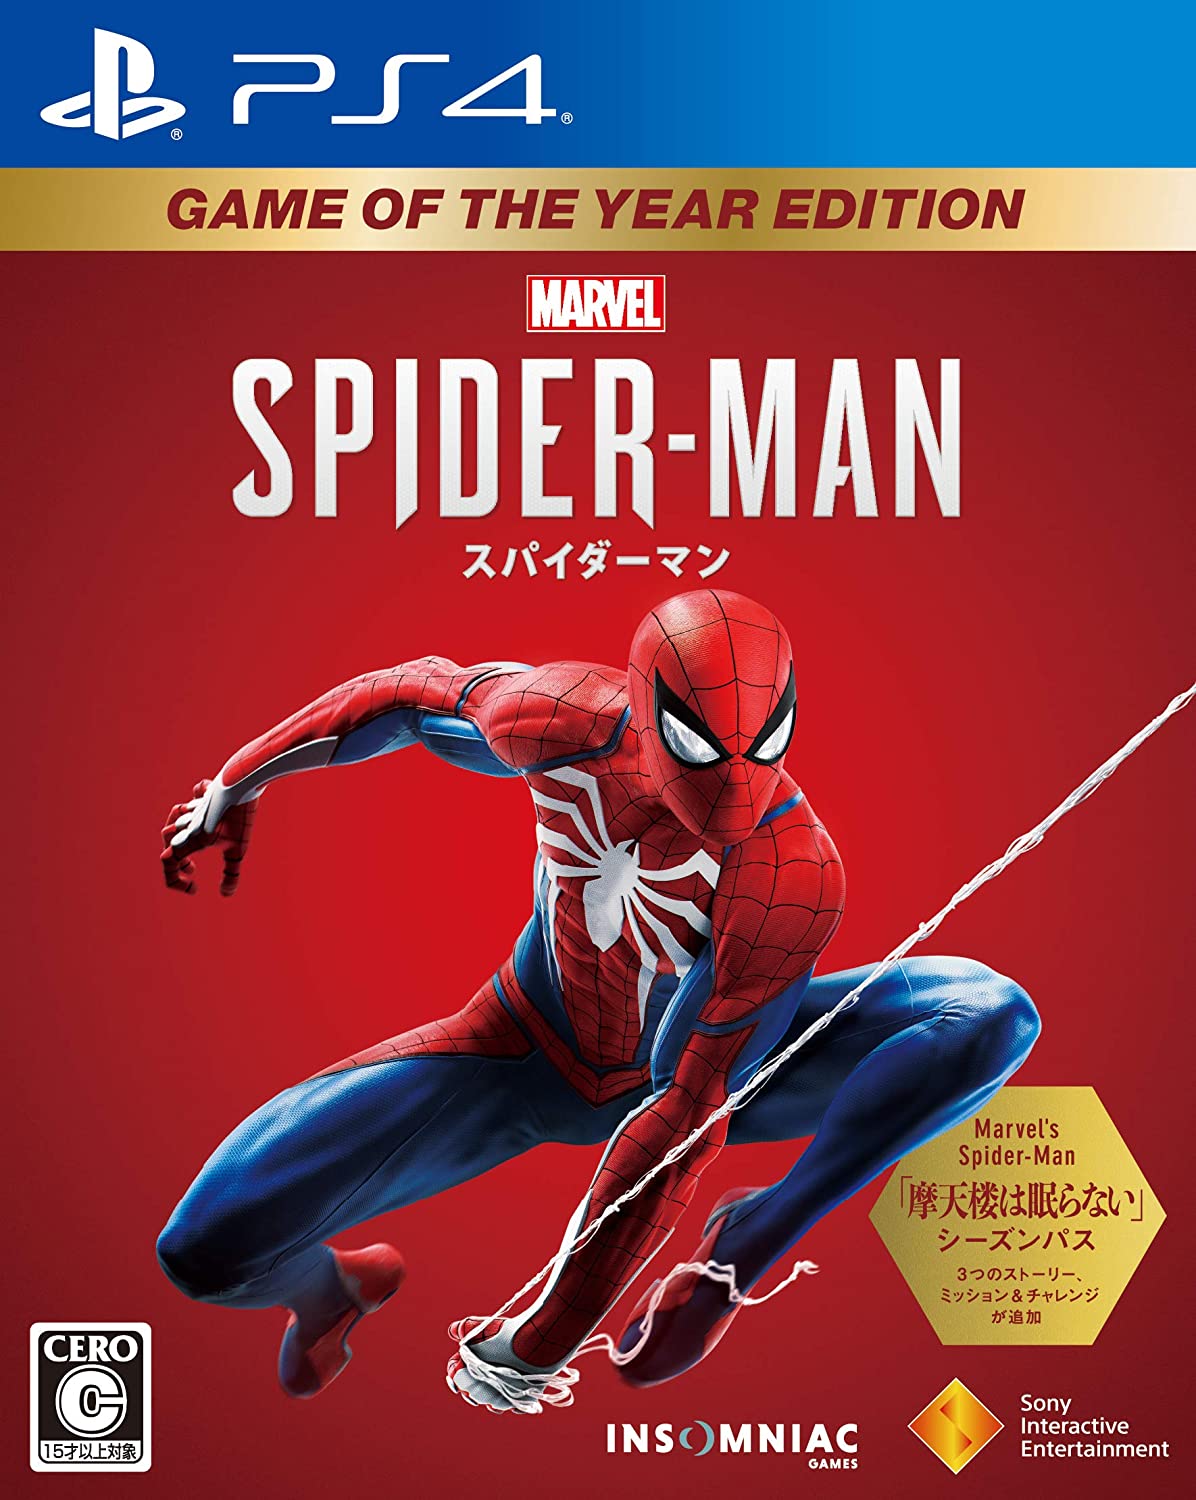 yzyÁzPS4 PlayStation 4 Marvel's Spider-Man Game of the Year Edition XpC_[}